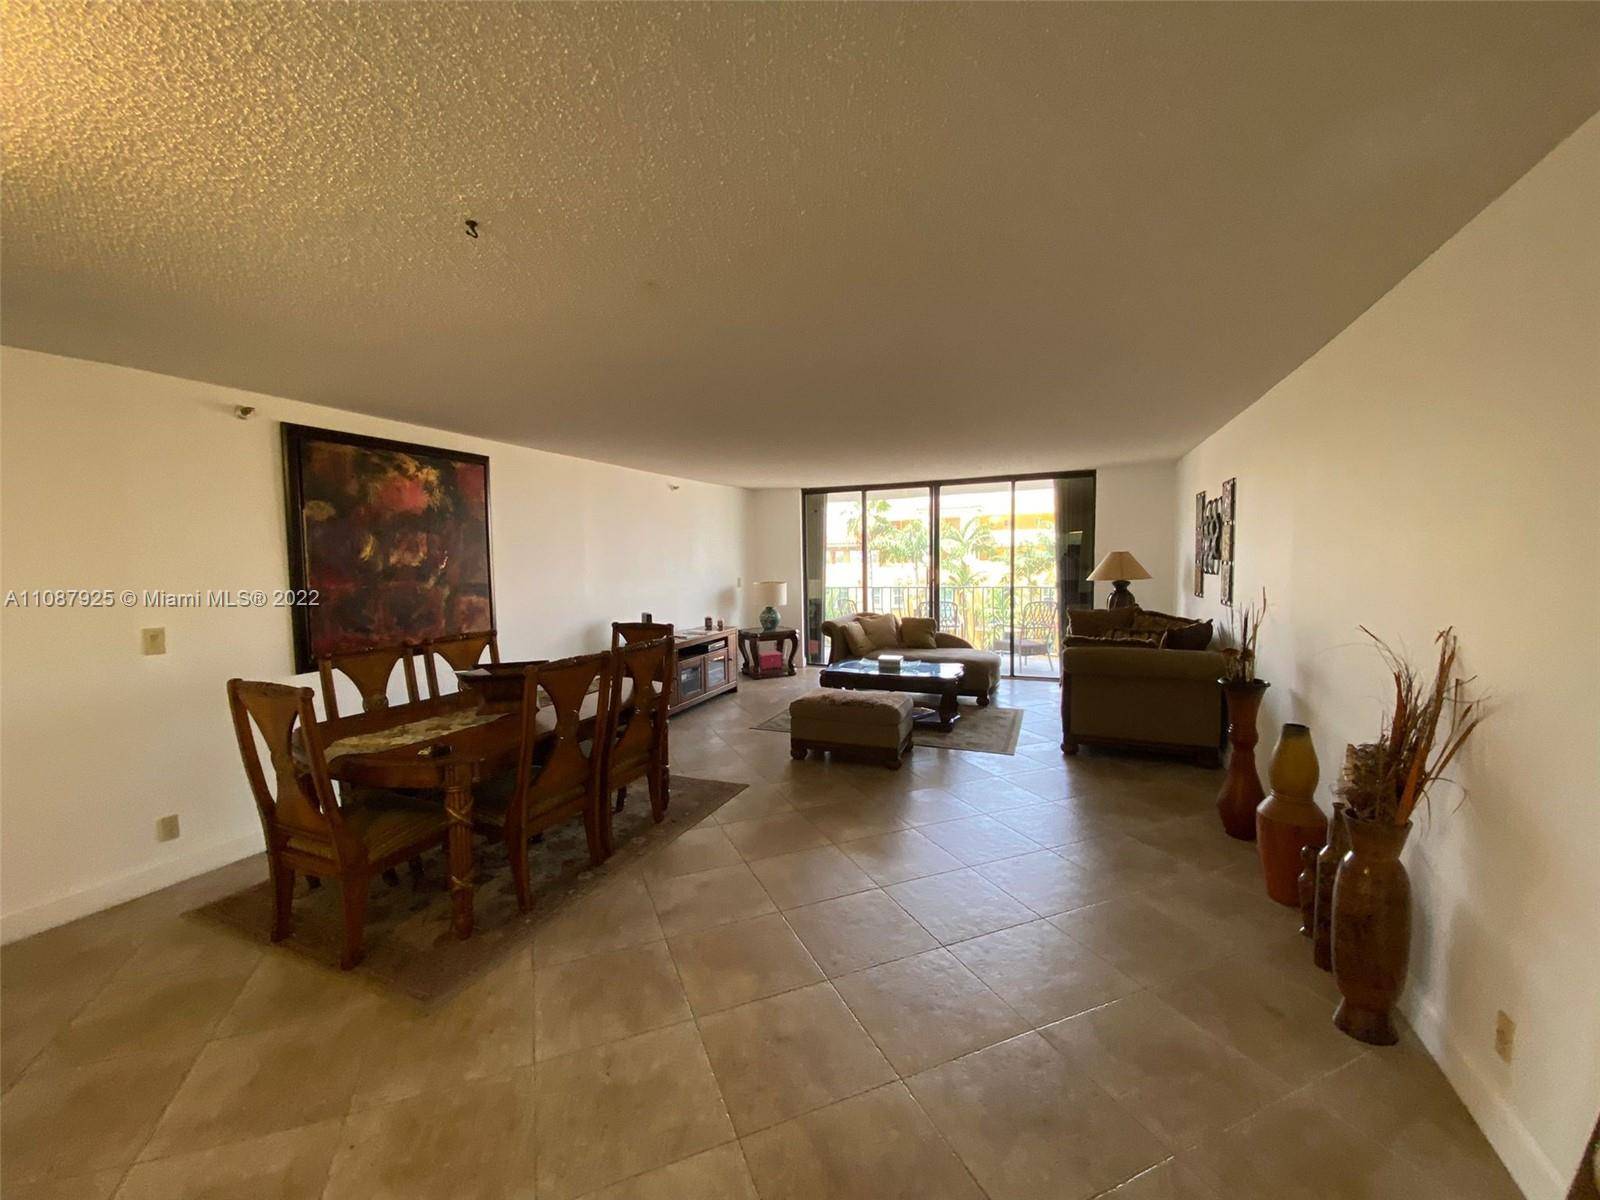 Infinite possibilities of making this spacious 1 bedroom 2 full bathrooms unit your home.